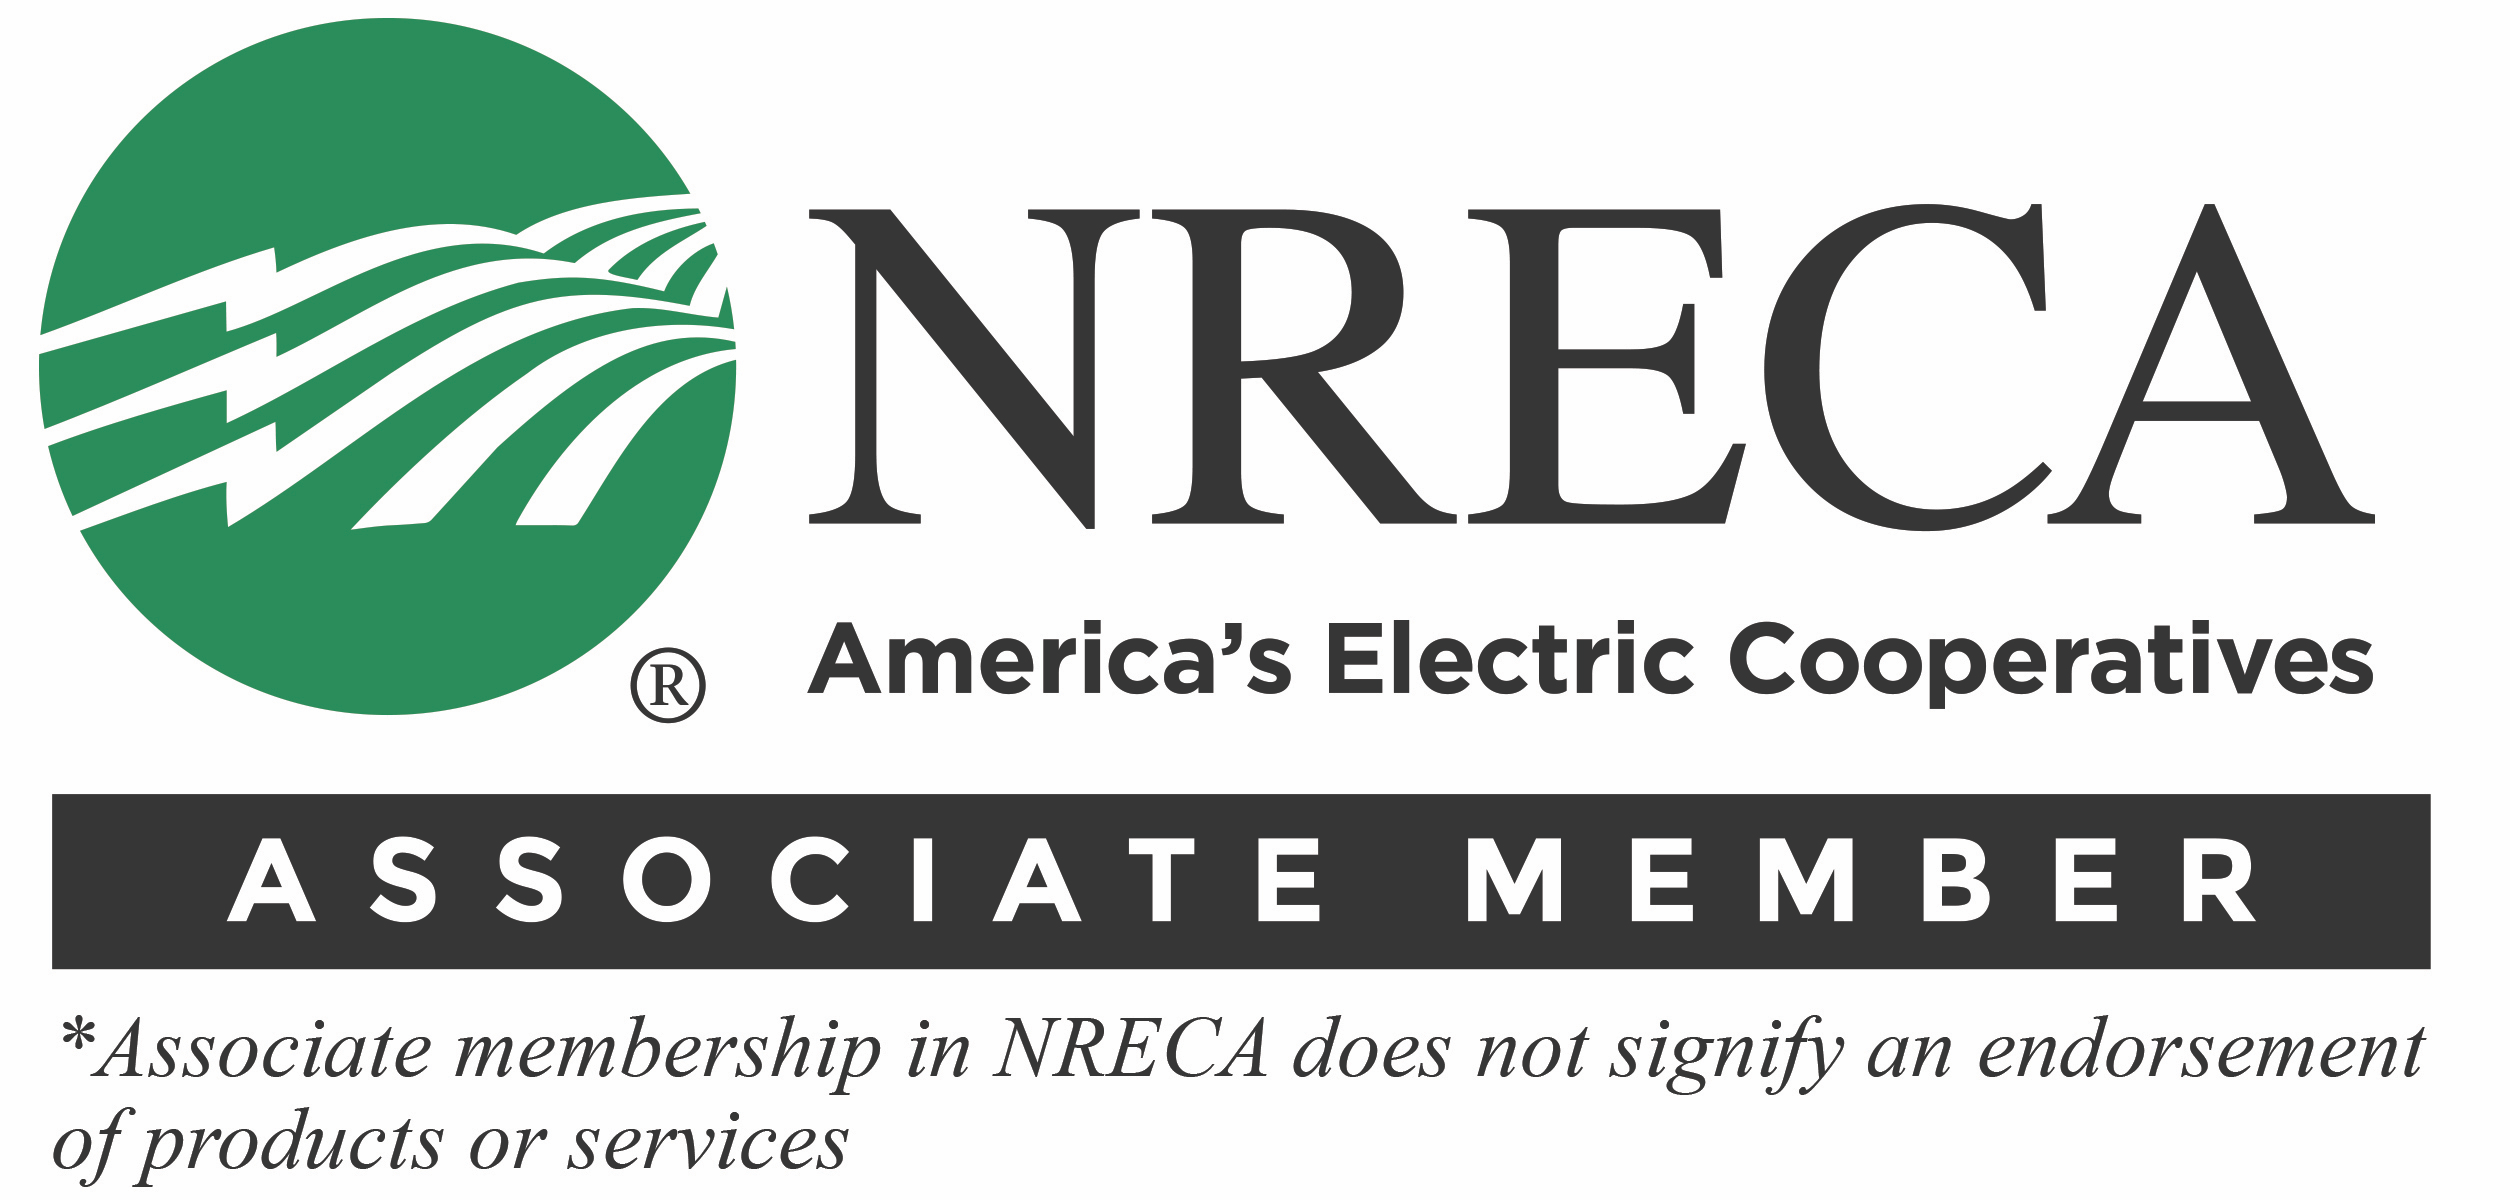 NRECA | America's Electric Cooperatives | Associate Member | * Associate Membership in NRECA Does Not Signify an Endorsement of Products or Services